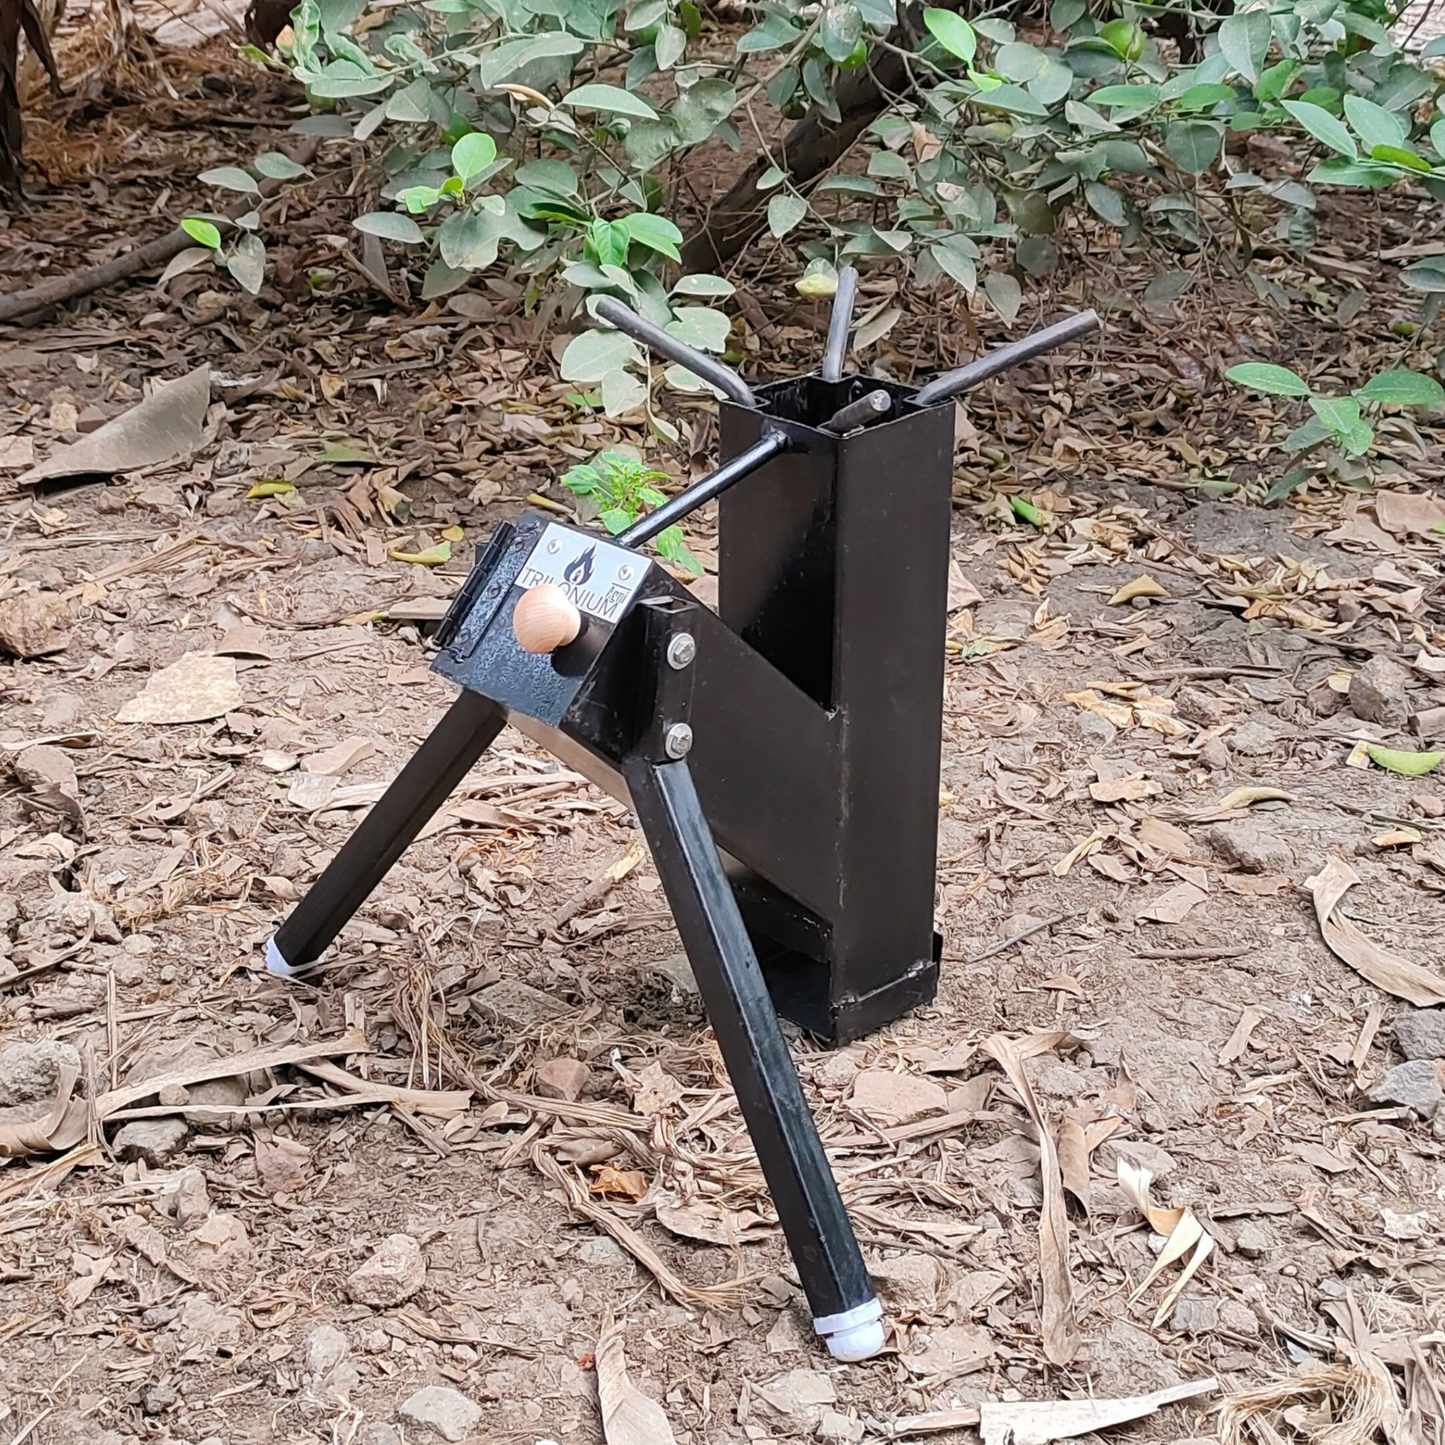 Trilonium Rocket Stove Agni 2.0: The Ultimate Outdoor Rocket Stove for Camping and Backpacking